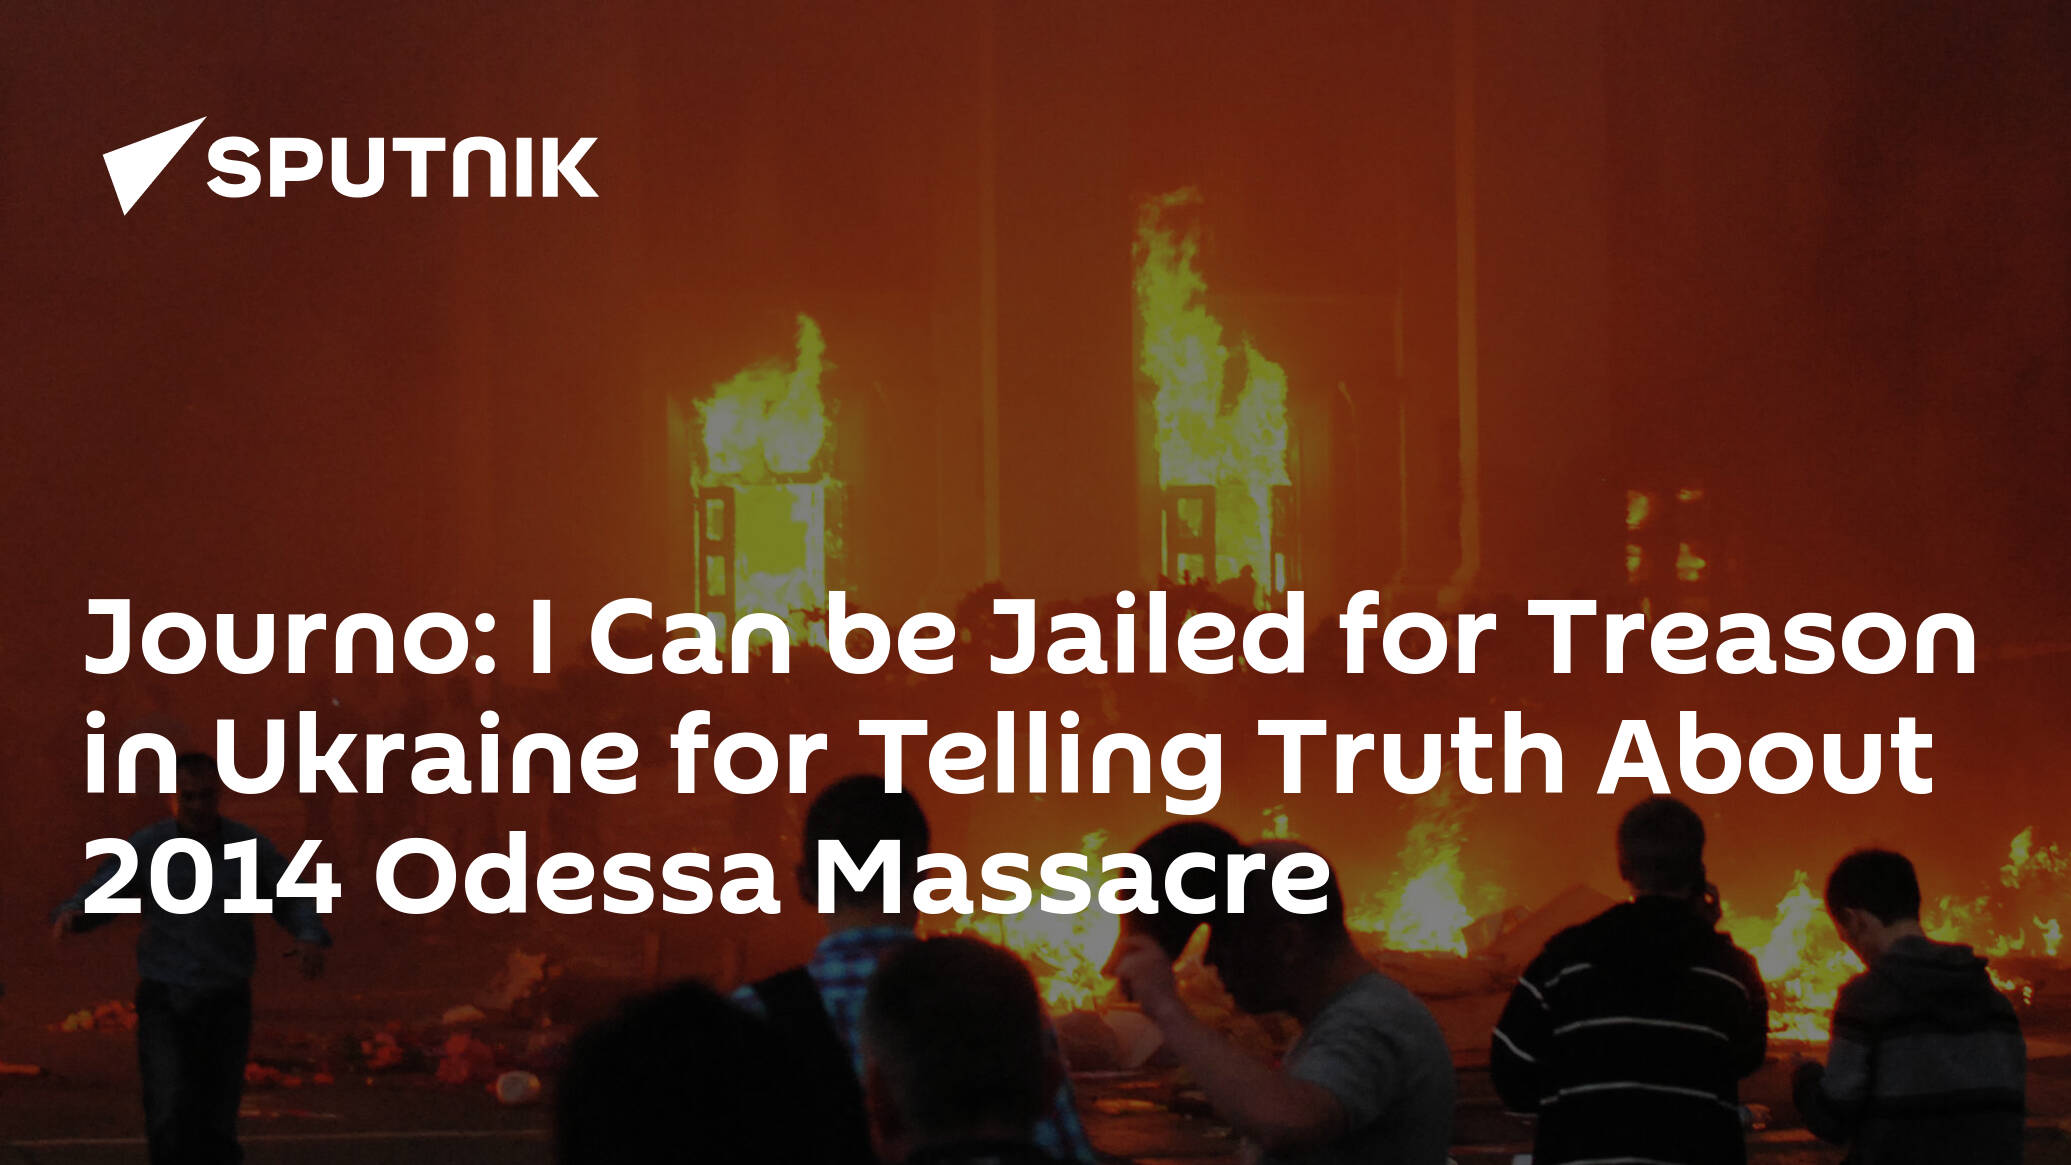 Journo: I Can be Jailed for Treason in Ukraine for Telling Truth About 2014 Odessa Massacre